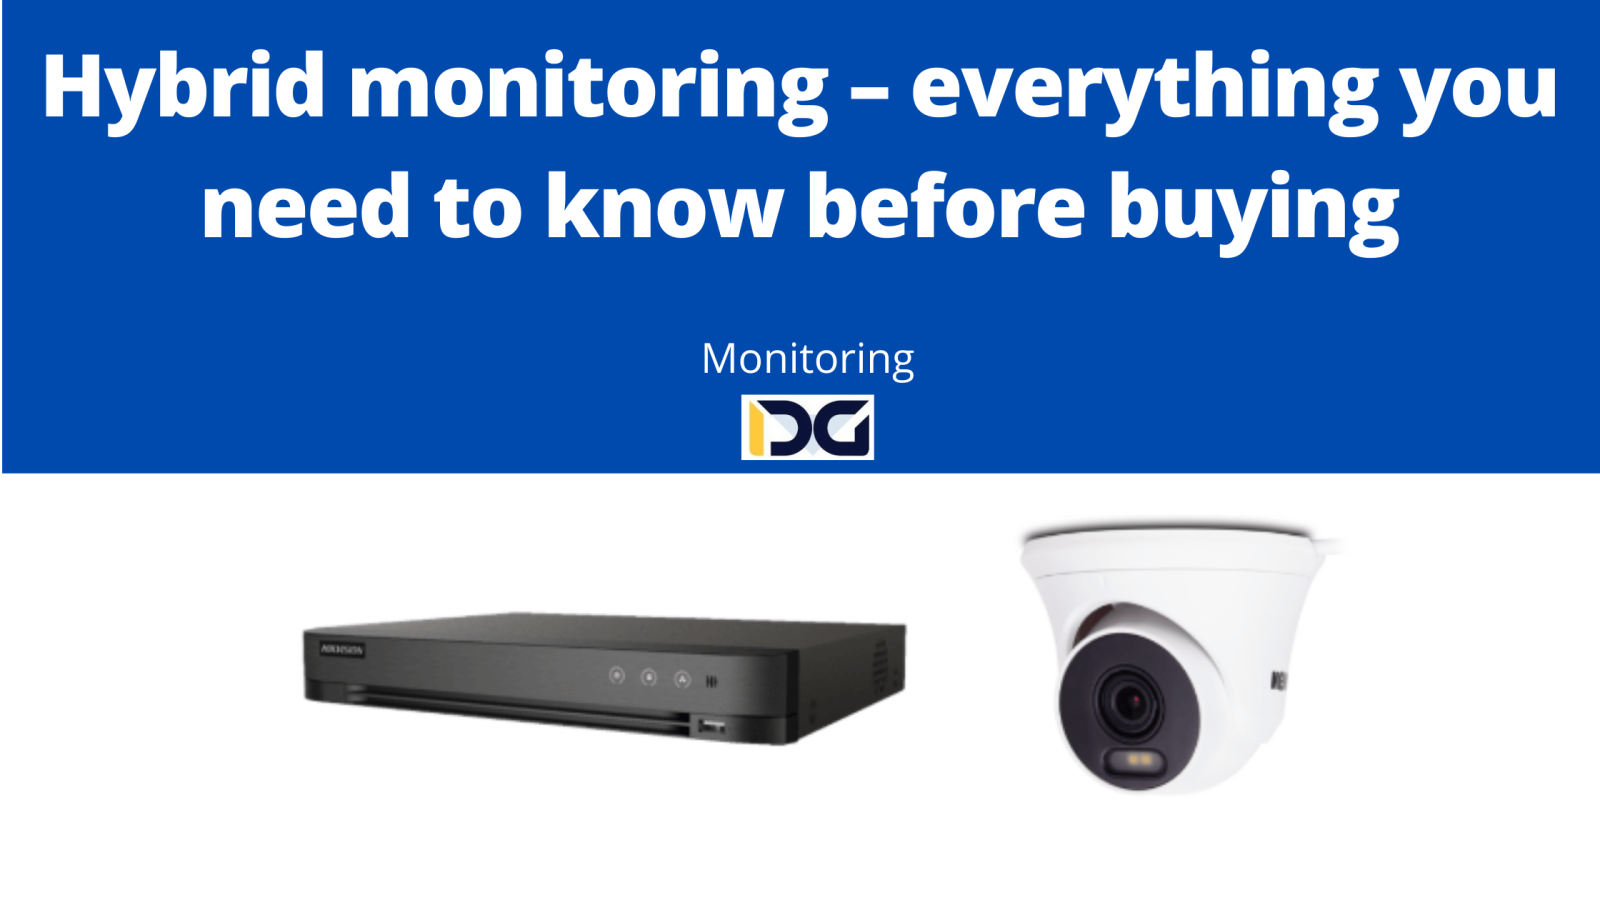 Hybrid monitoring - everything you need to know before buying